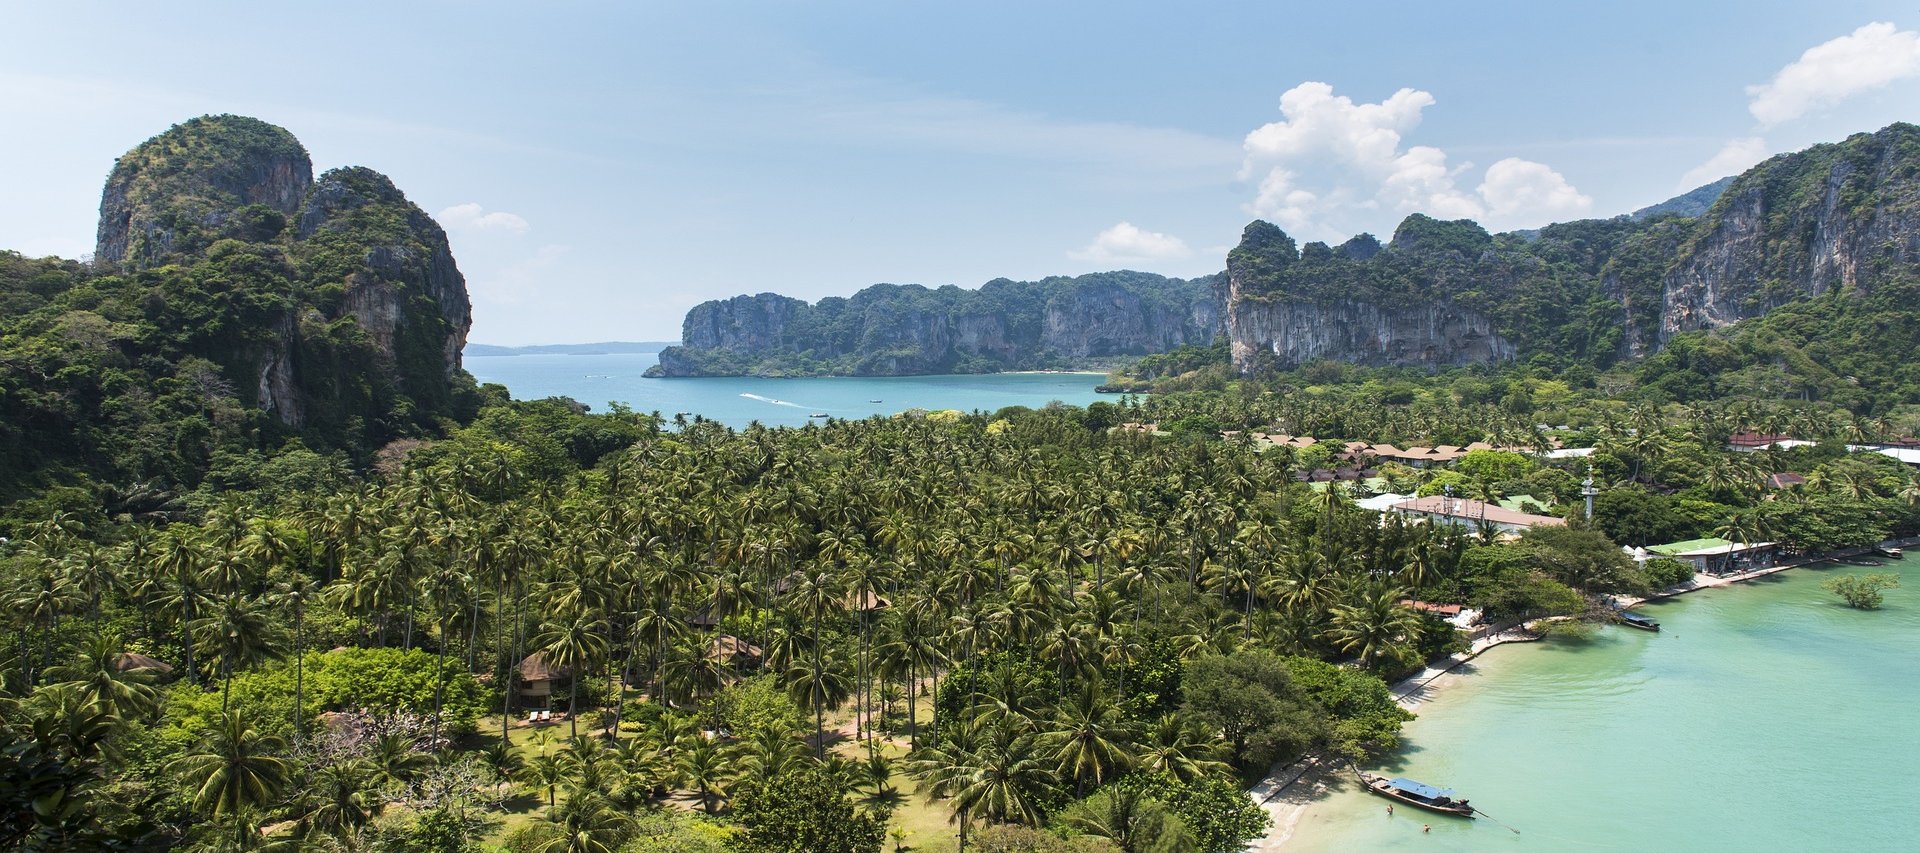 67 Best Things to Do in Phuket - What is Phuket Most Famous For